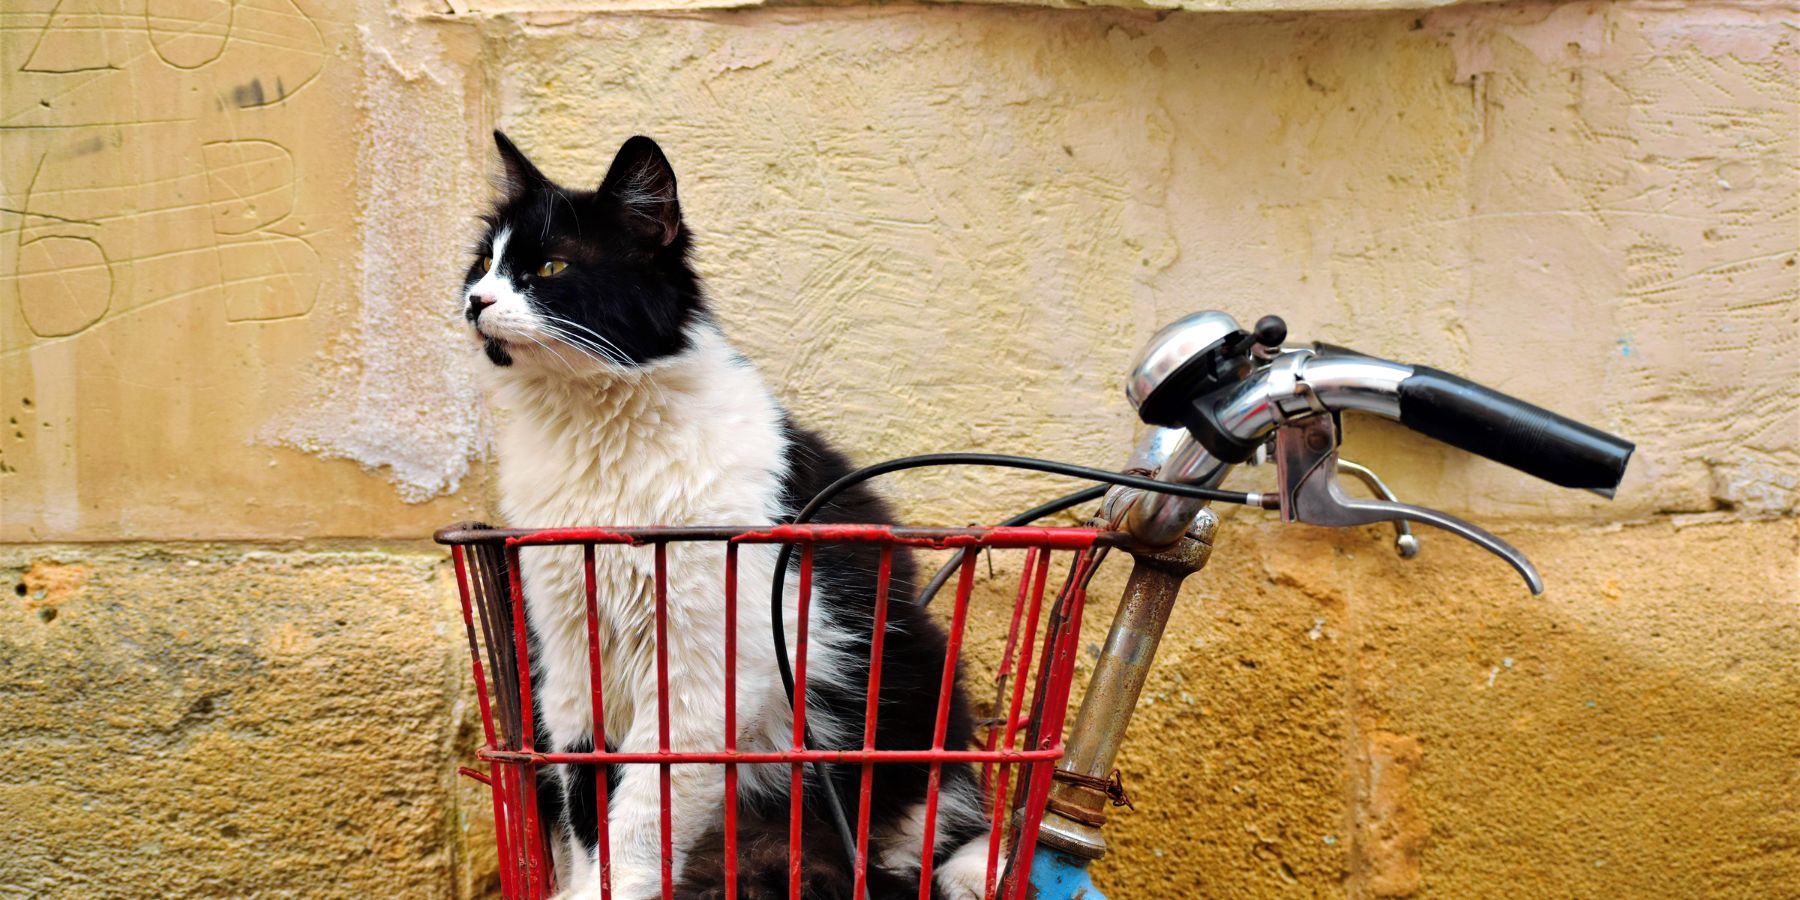 What's the Best Gear for Biking with Cats?